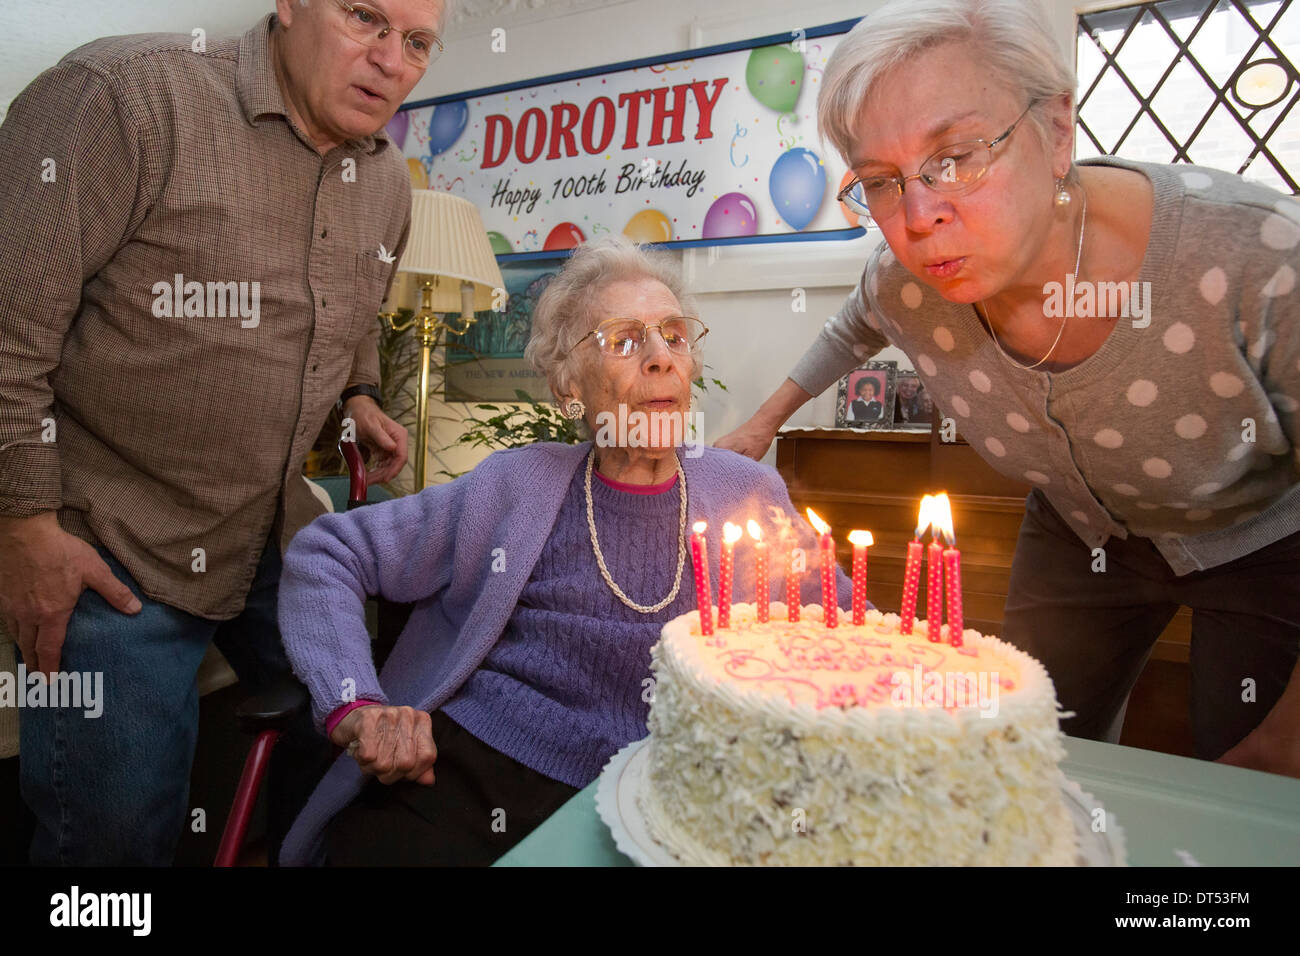 Detroit, Michigan - Dorothy Newell celebrates her 100th birthday with her daughter, Susan Newell, and her son, Robert Newell. Stock Photo